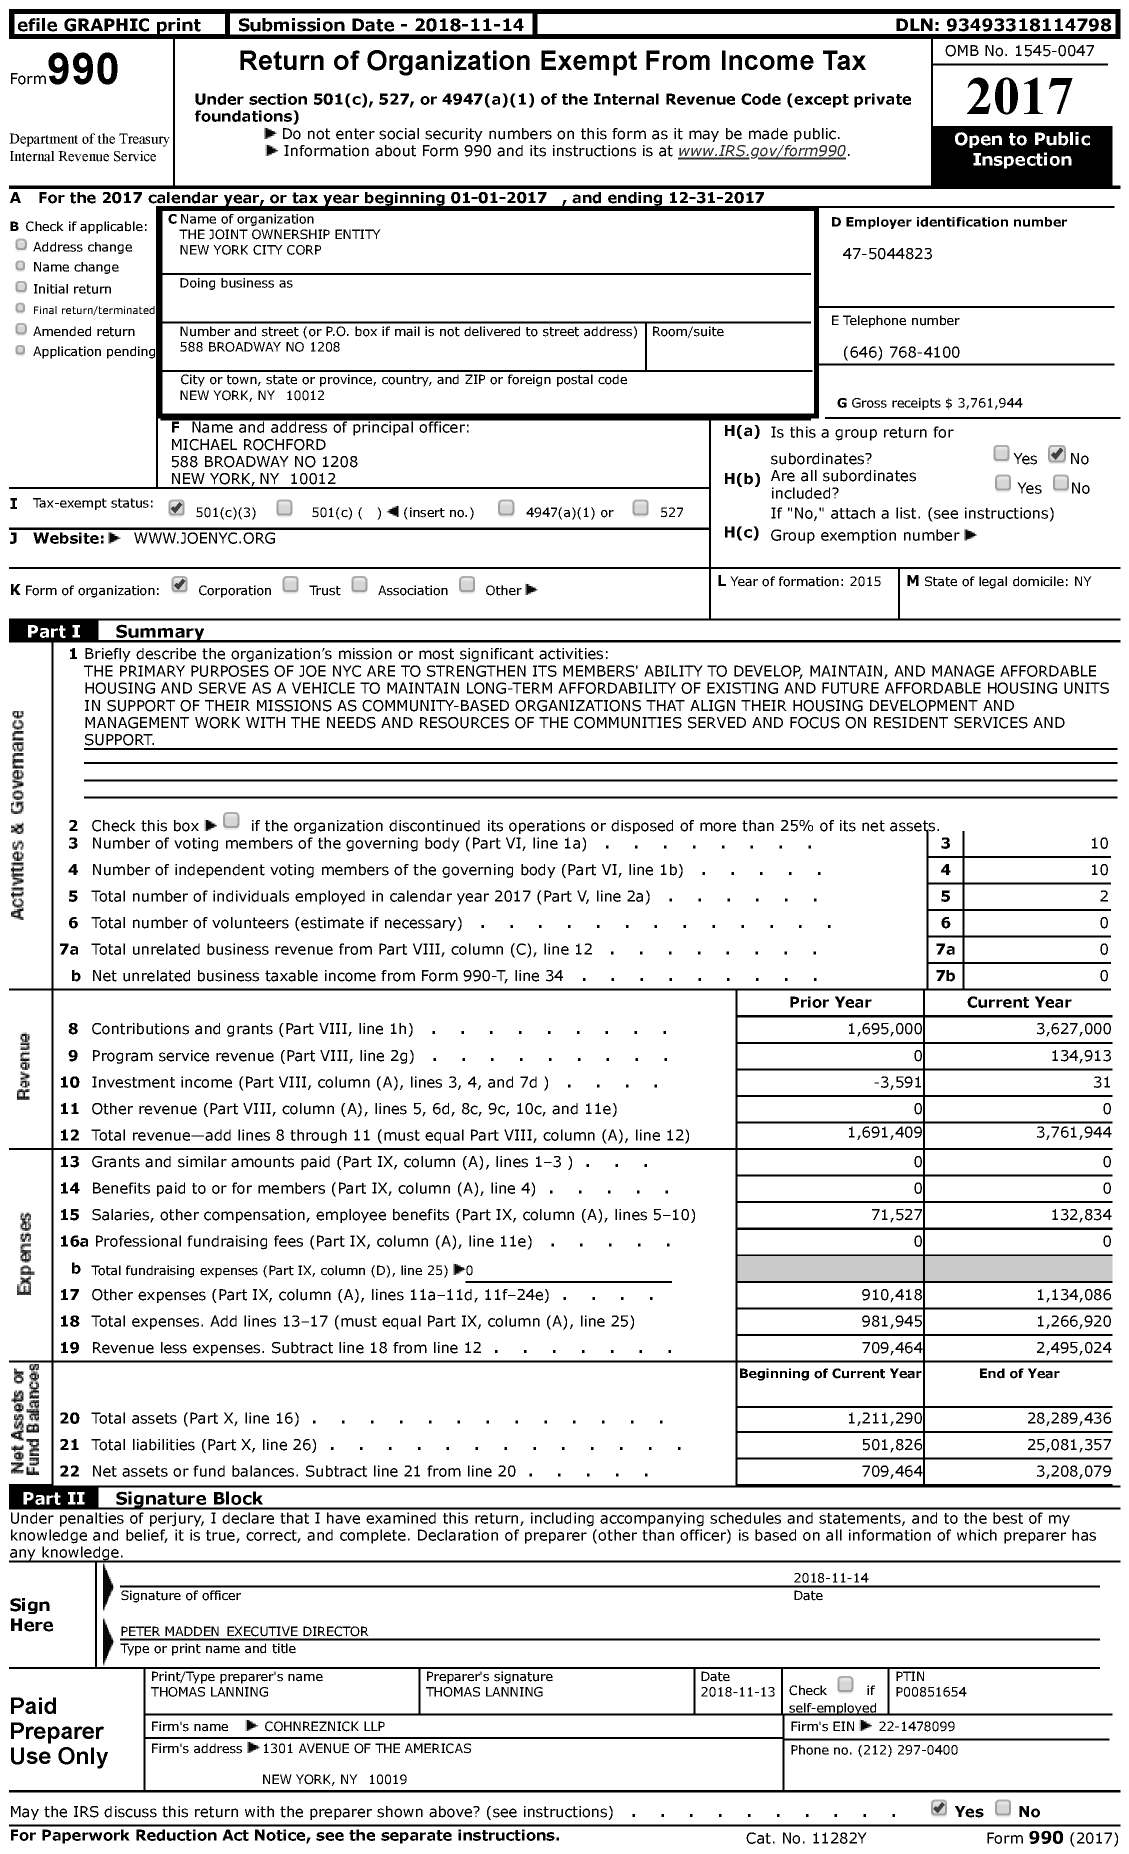 Image of first page of 2017 Form 990 for The Joint Ownership Entity New York City Corporation